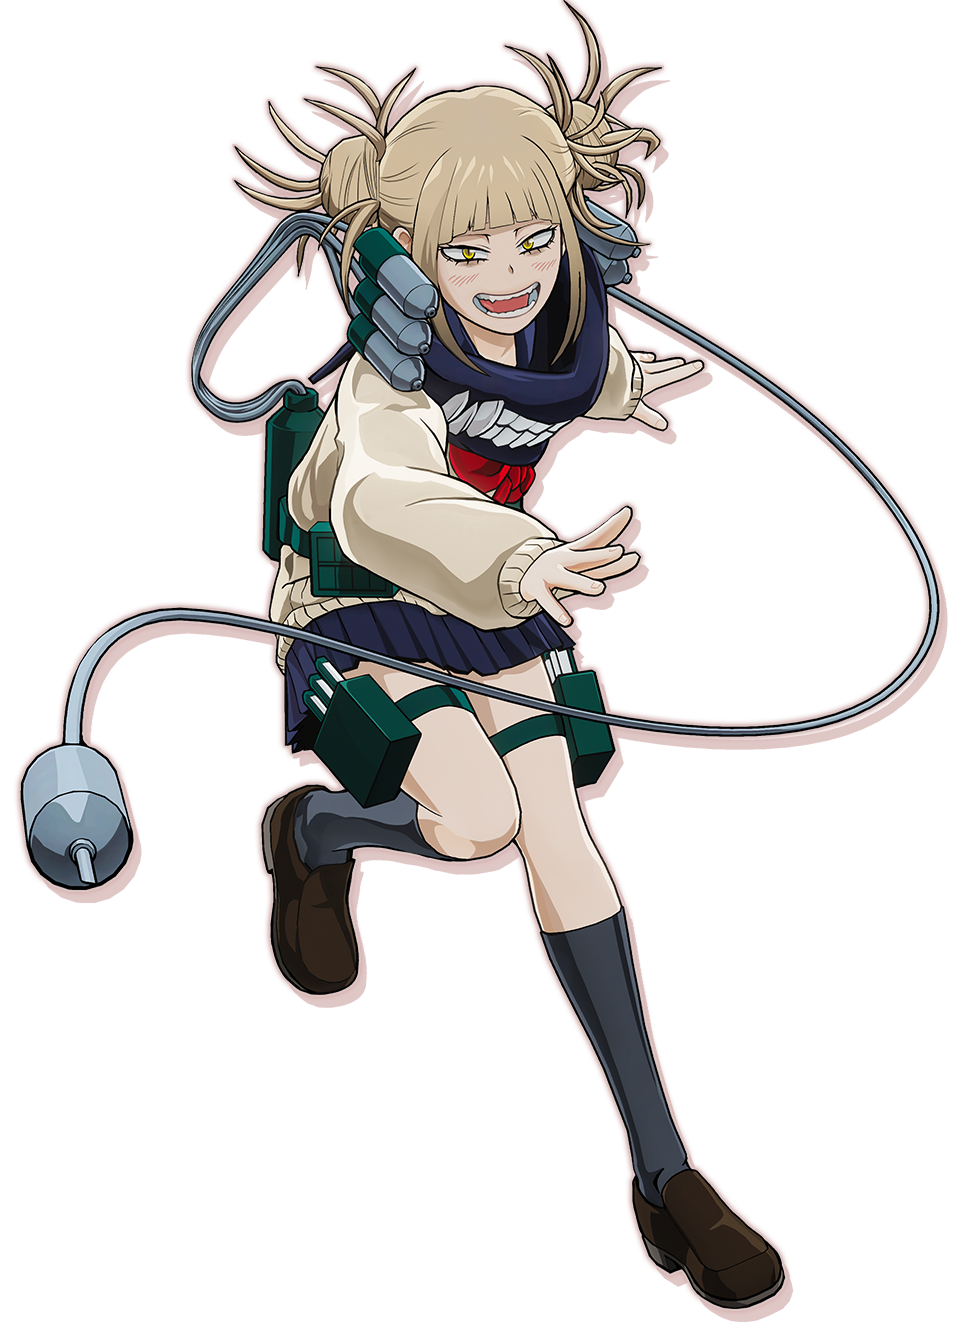 Himiko Toga One's Justice